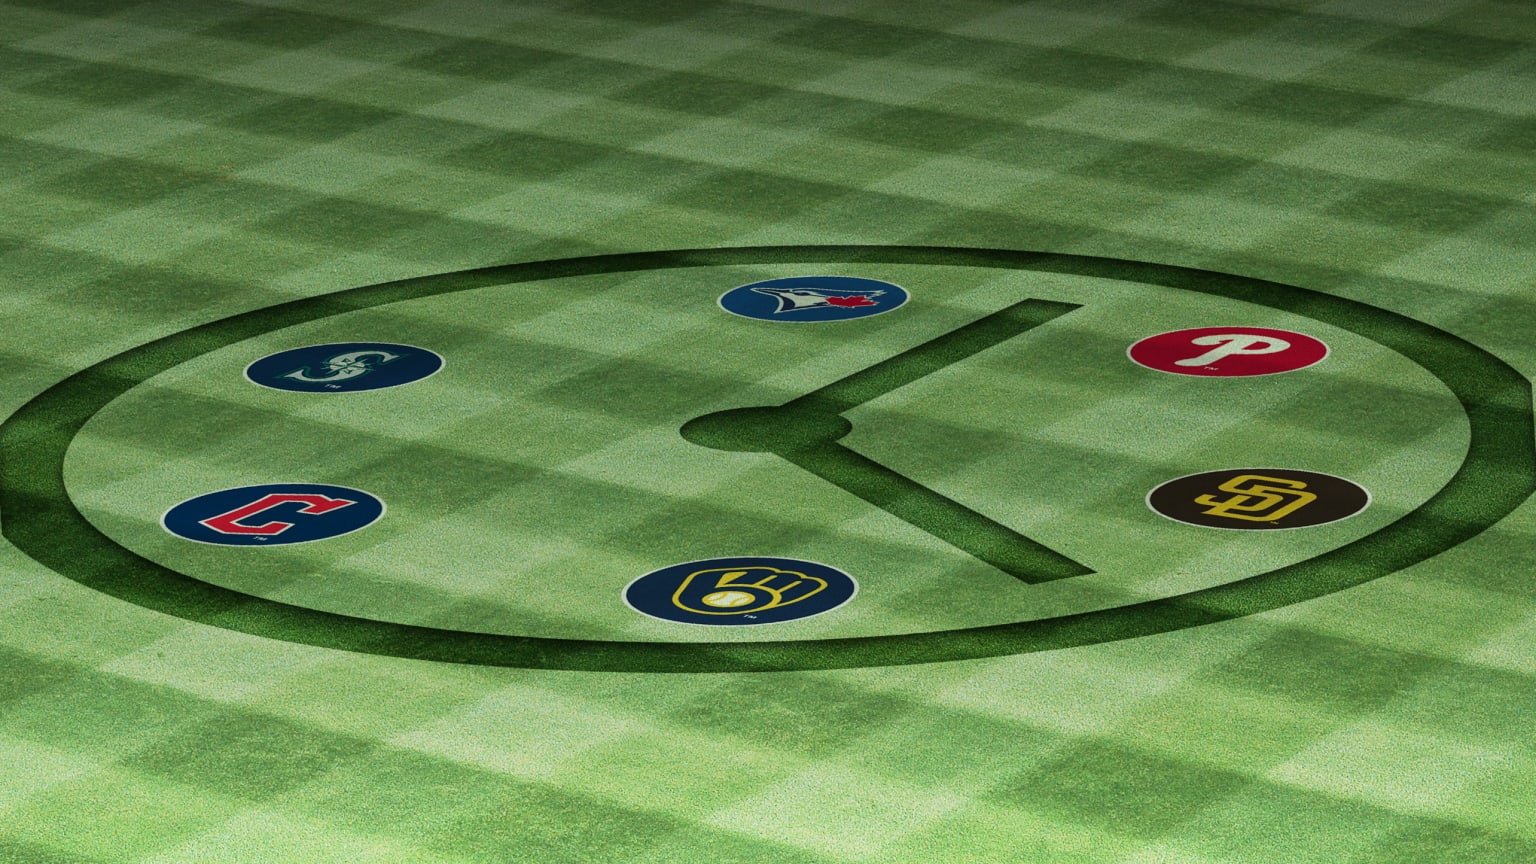 A graphic showing a clock as if mowed into the outfield grass and the logos of the Phillies, Padres, Brewers, Guardians, Mariners and Blue Jays spaces out like numbers on the clock face